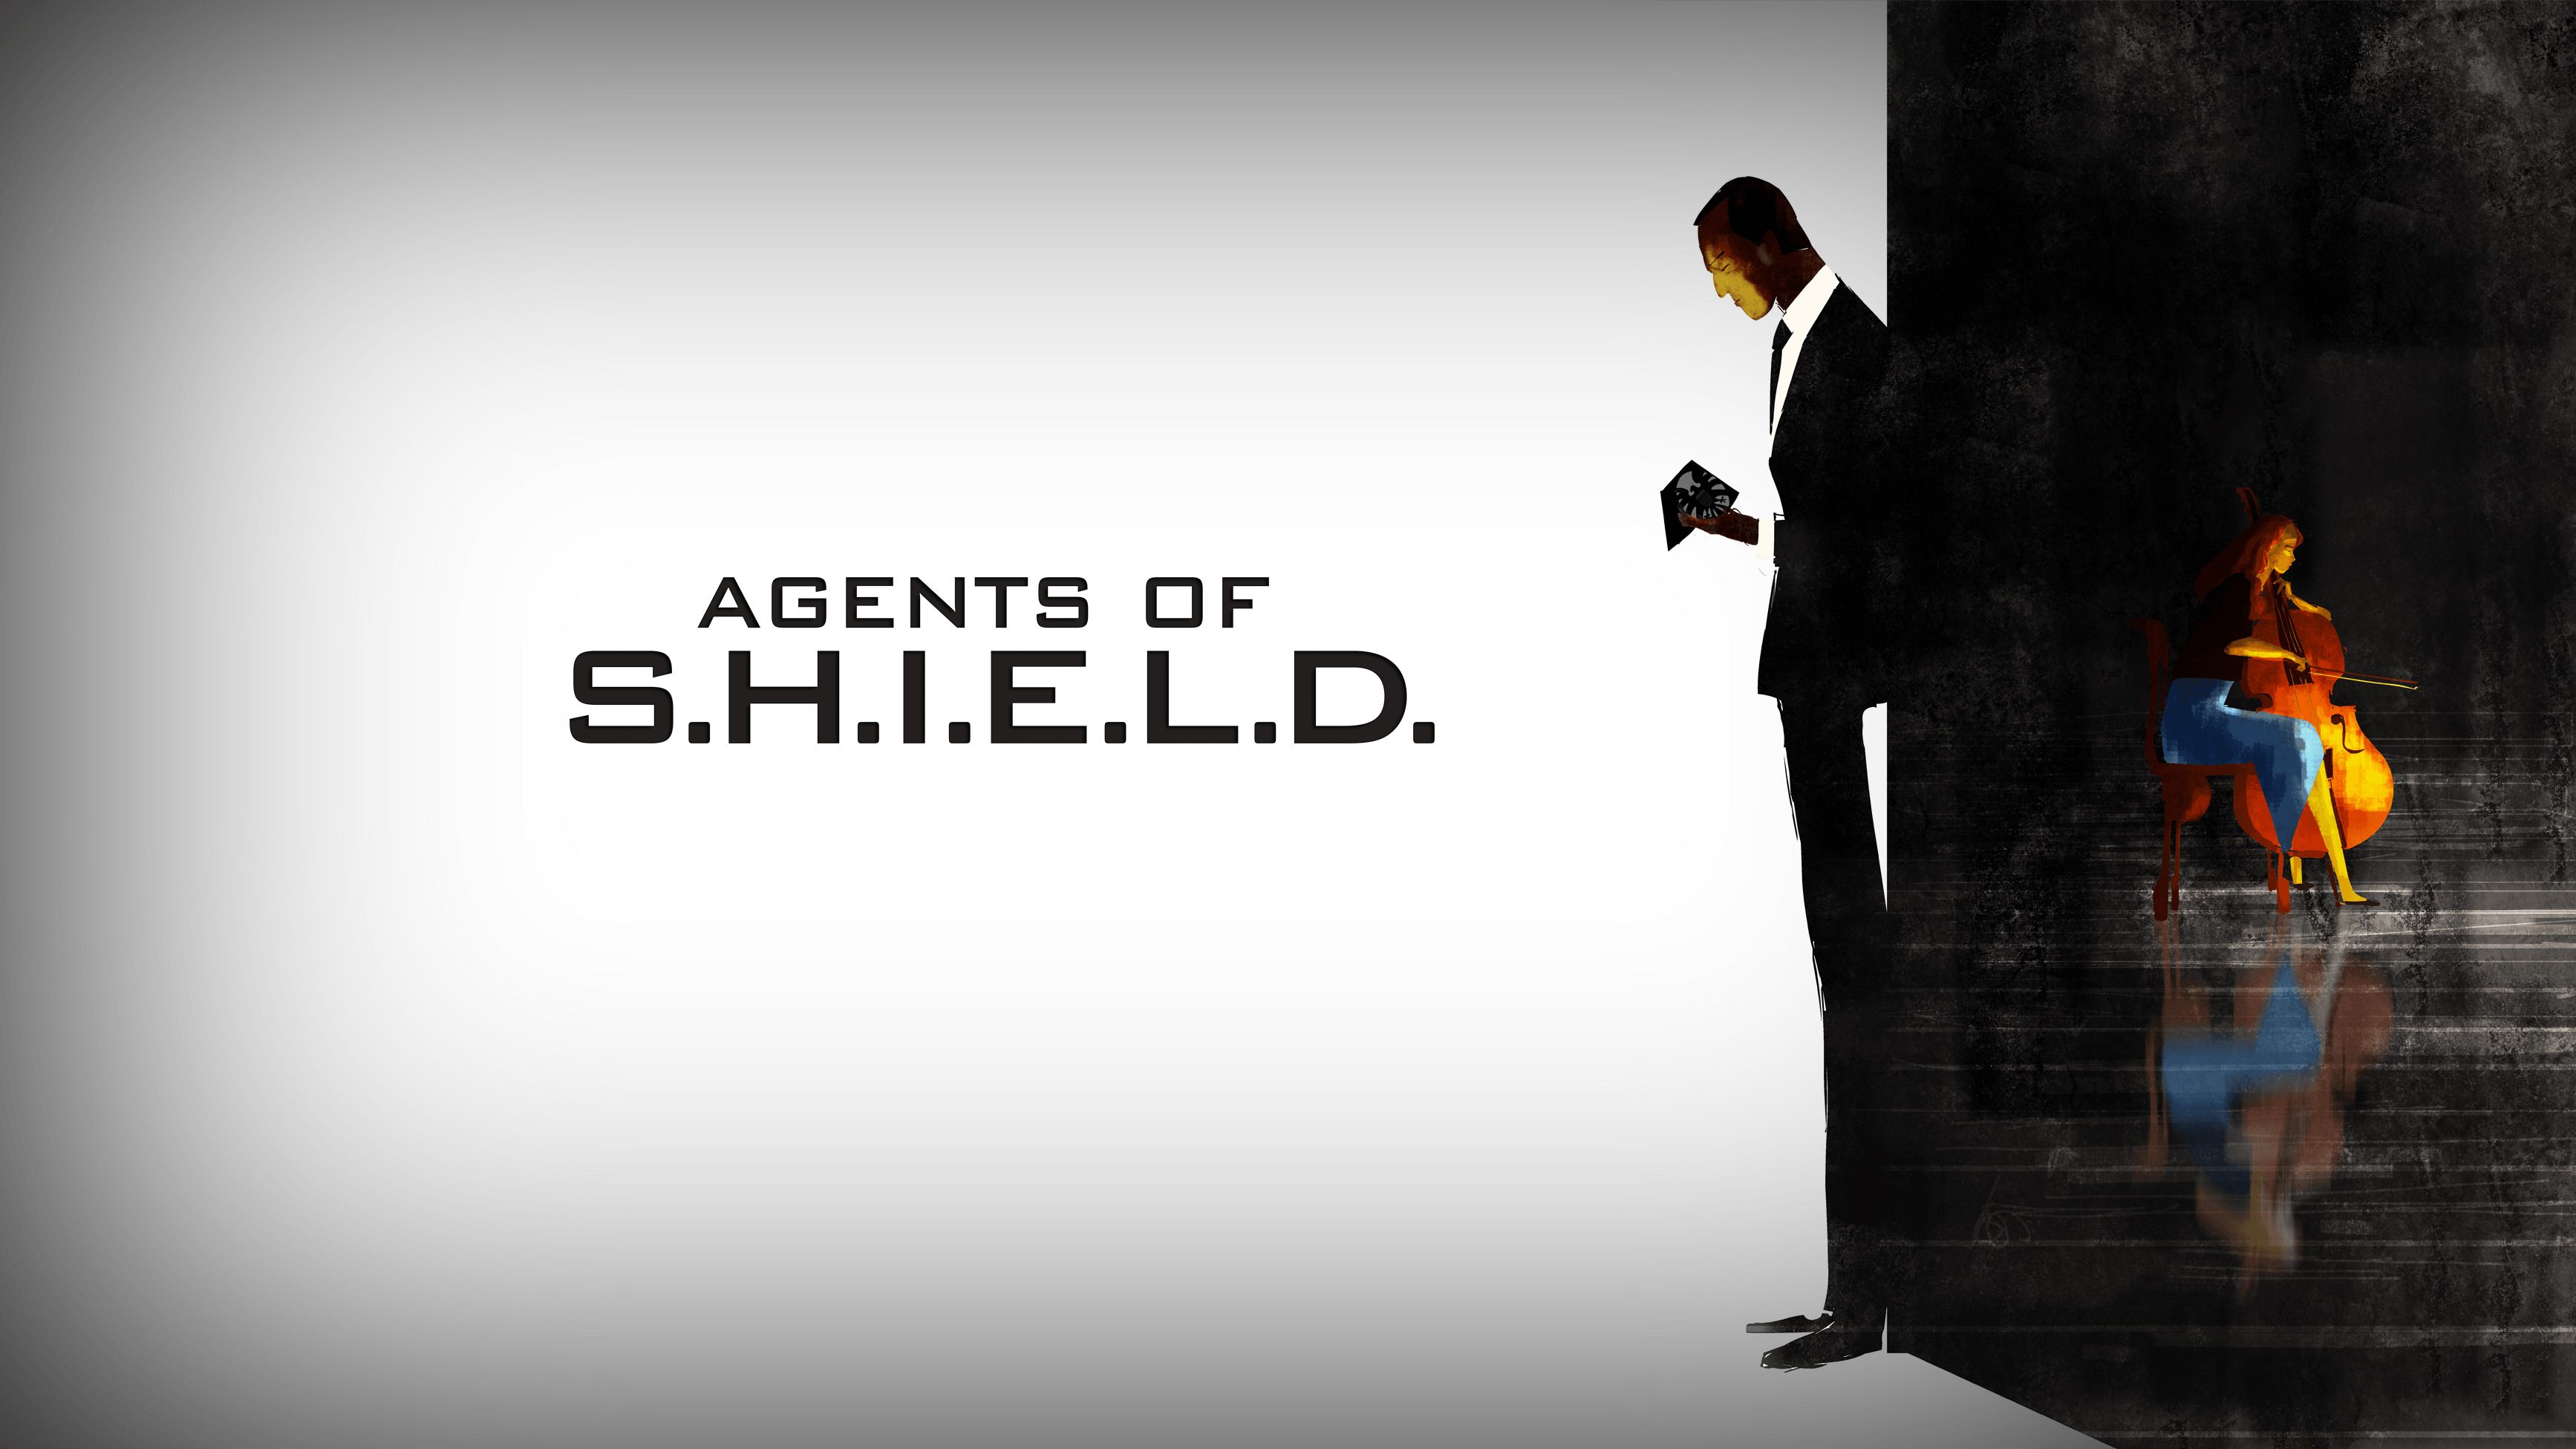 Phil Coulson, Agents Of S.H.I.E.L.D. Wallpaper HD / Desktop and Mobile Background